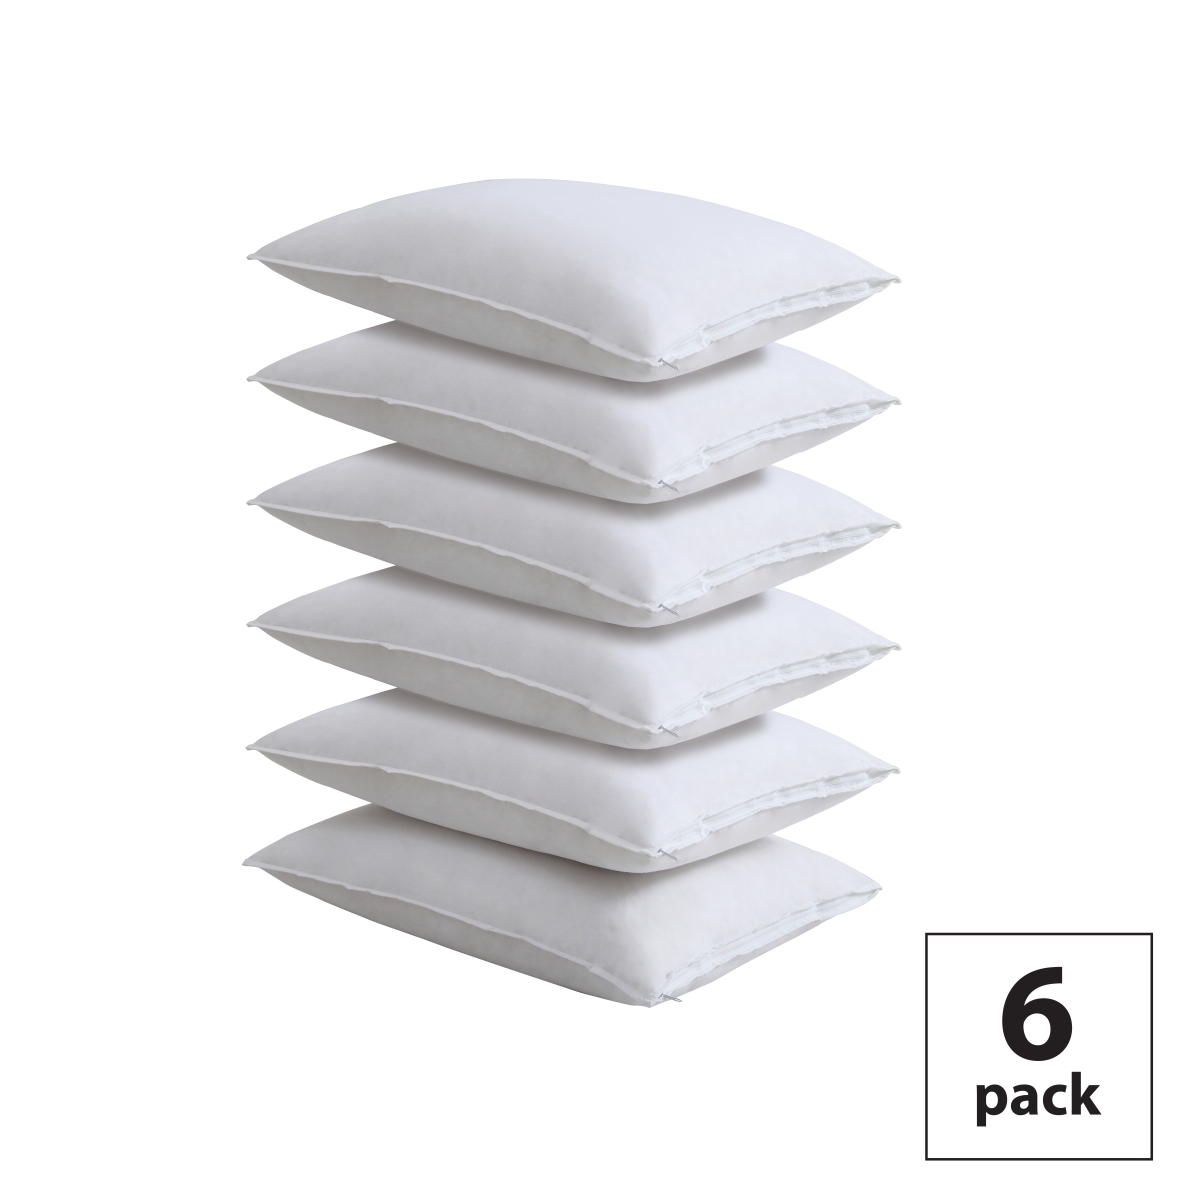 Fre10306whit08 Allergy Relief Pillow Protector Set, Queen Size - Pack Of 6